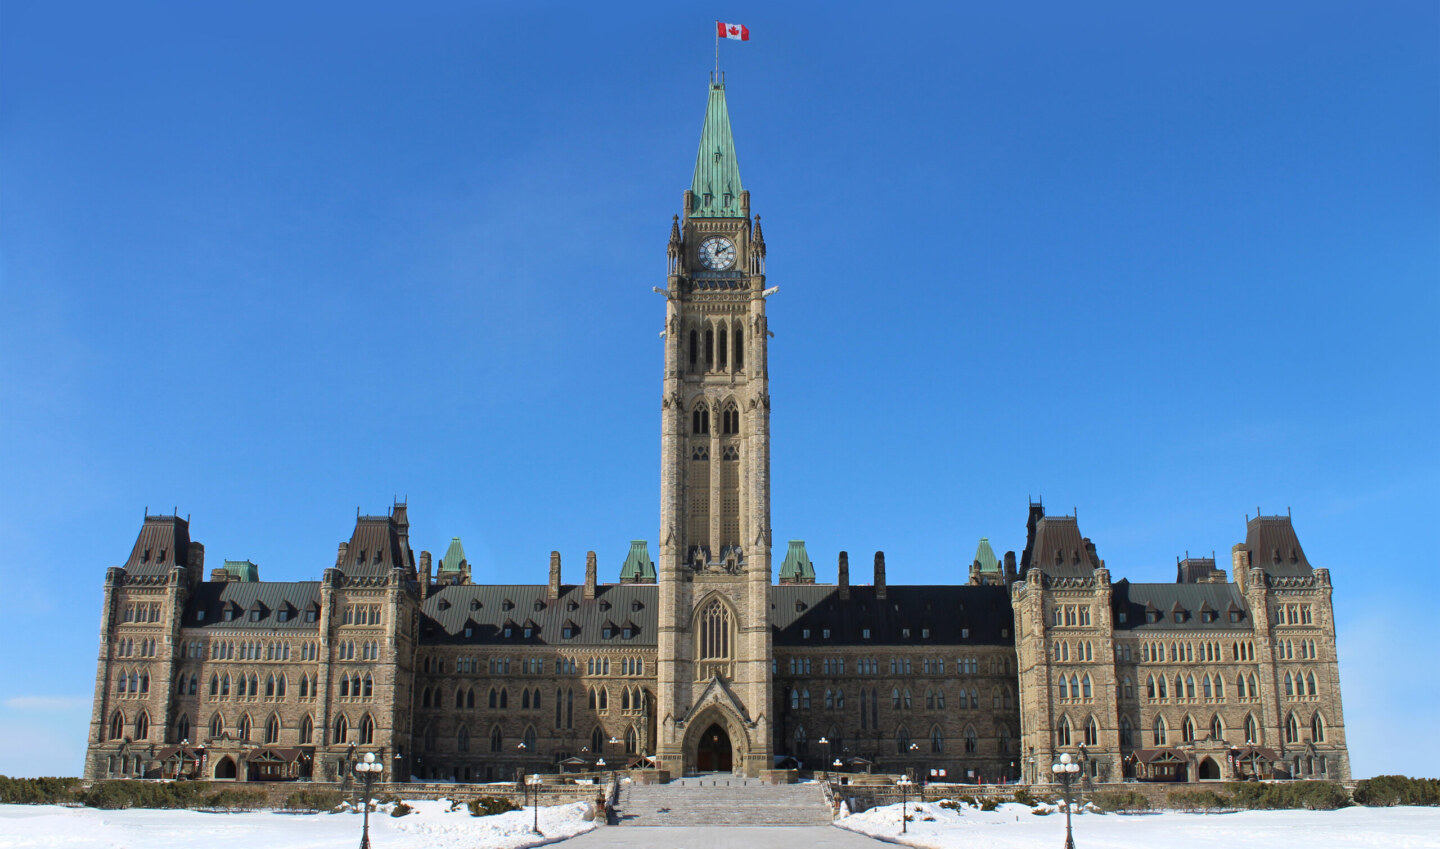 Parliament Of Canada In The Canadian Capital City Of Ottawa Onta